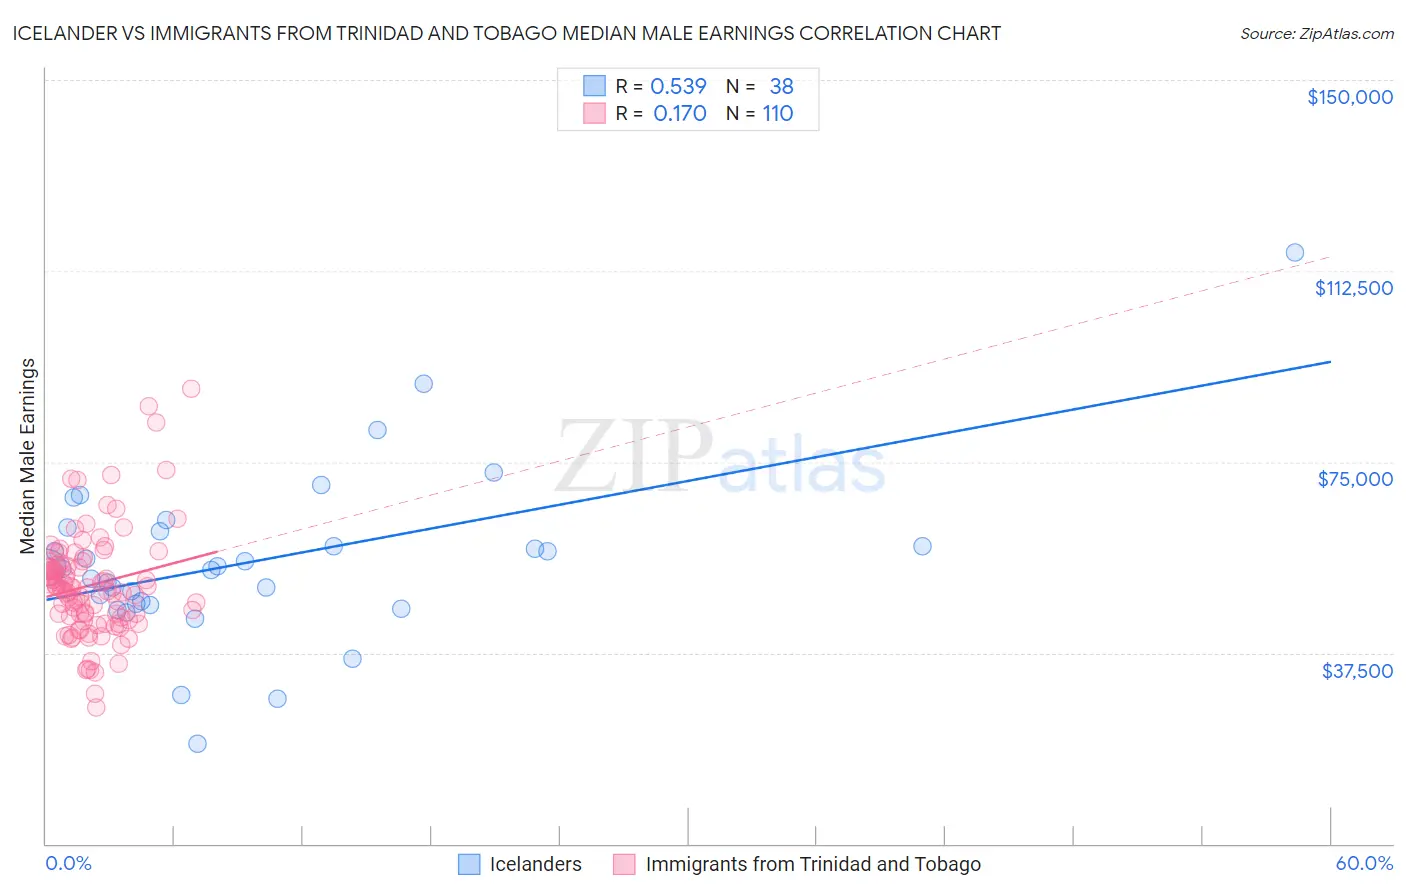 Icelander vs Immigrants from Trinidad and Tobago Median Male Earnings